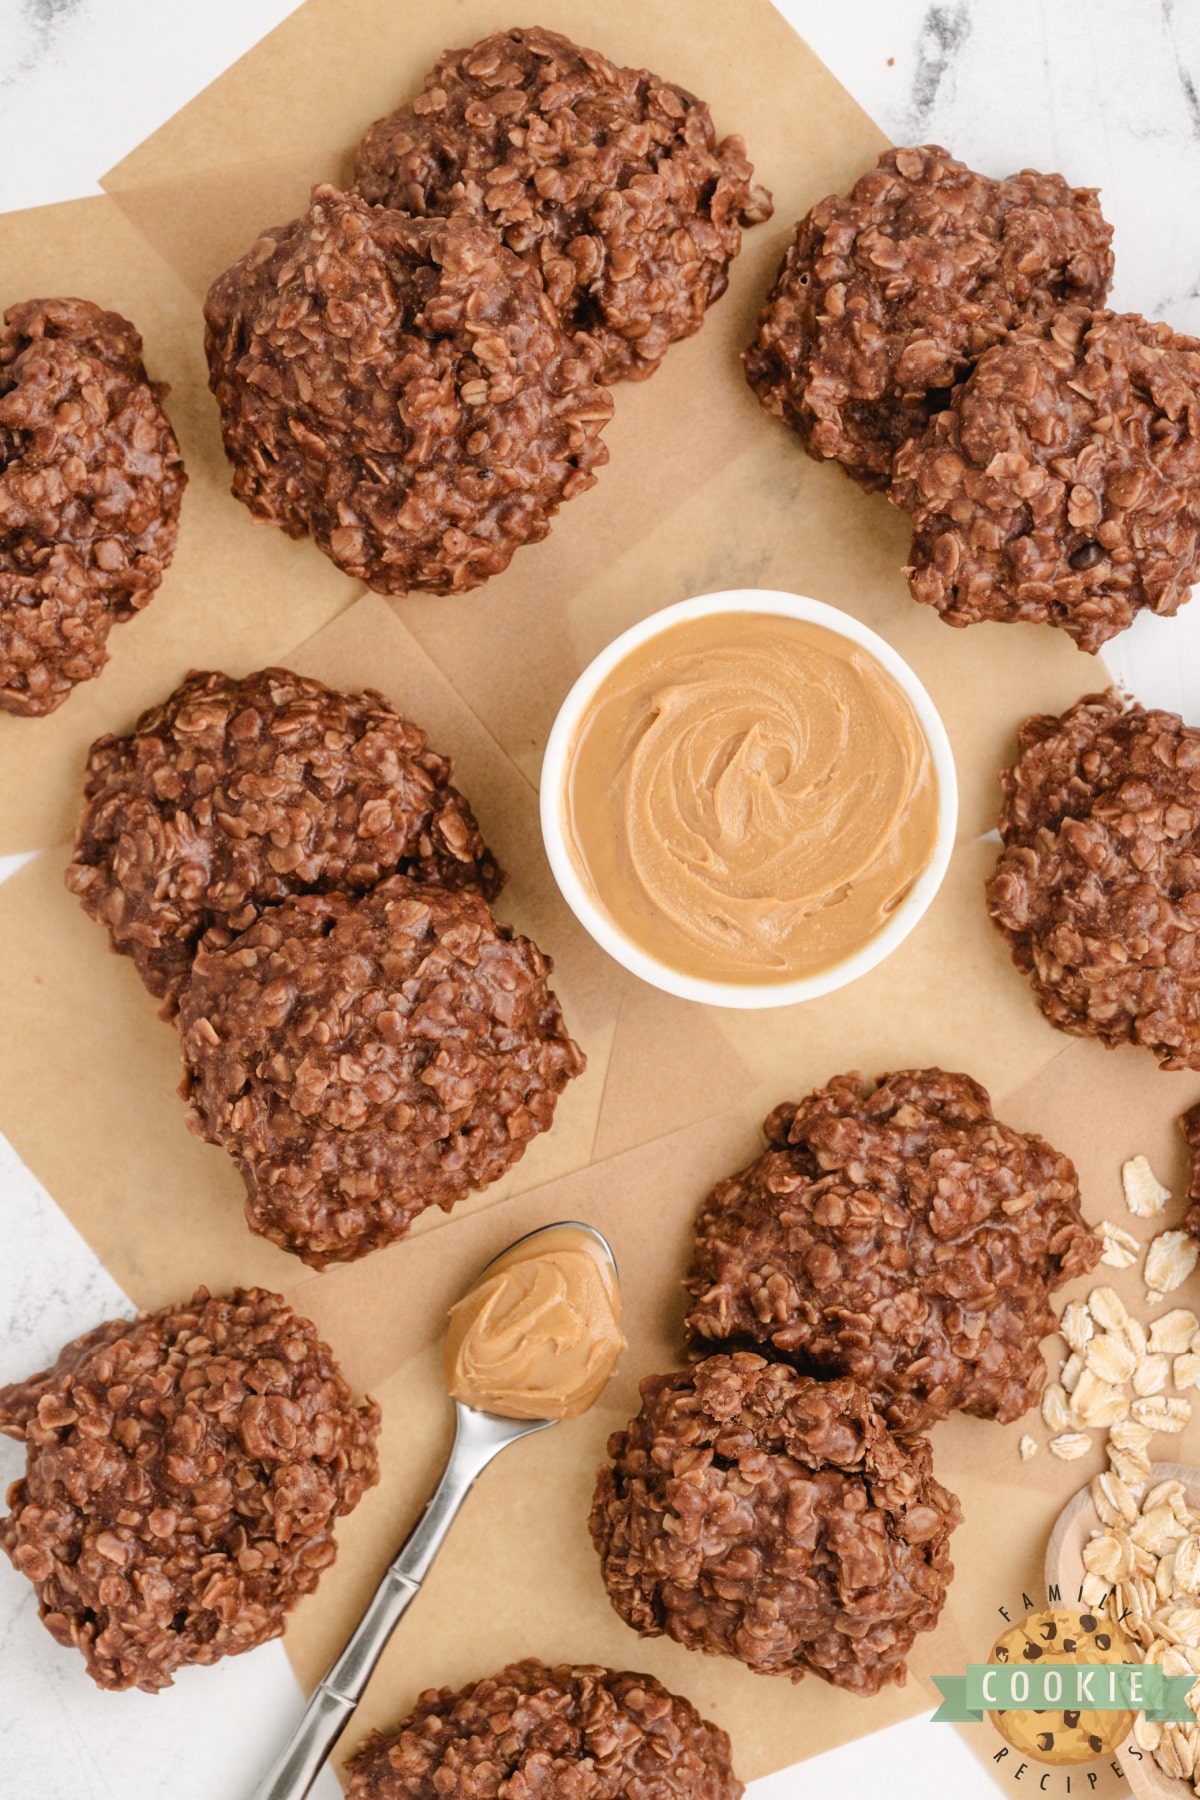 No bake cookies made with peanut butter, chocolate, and oats. 